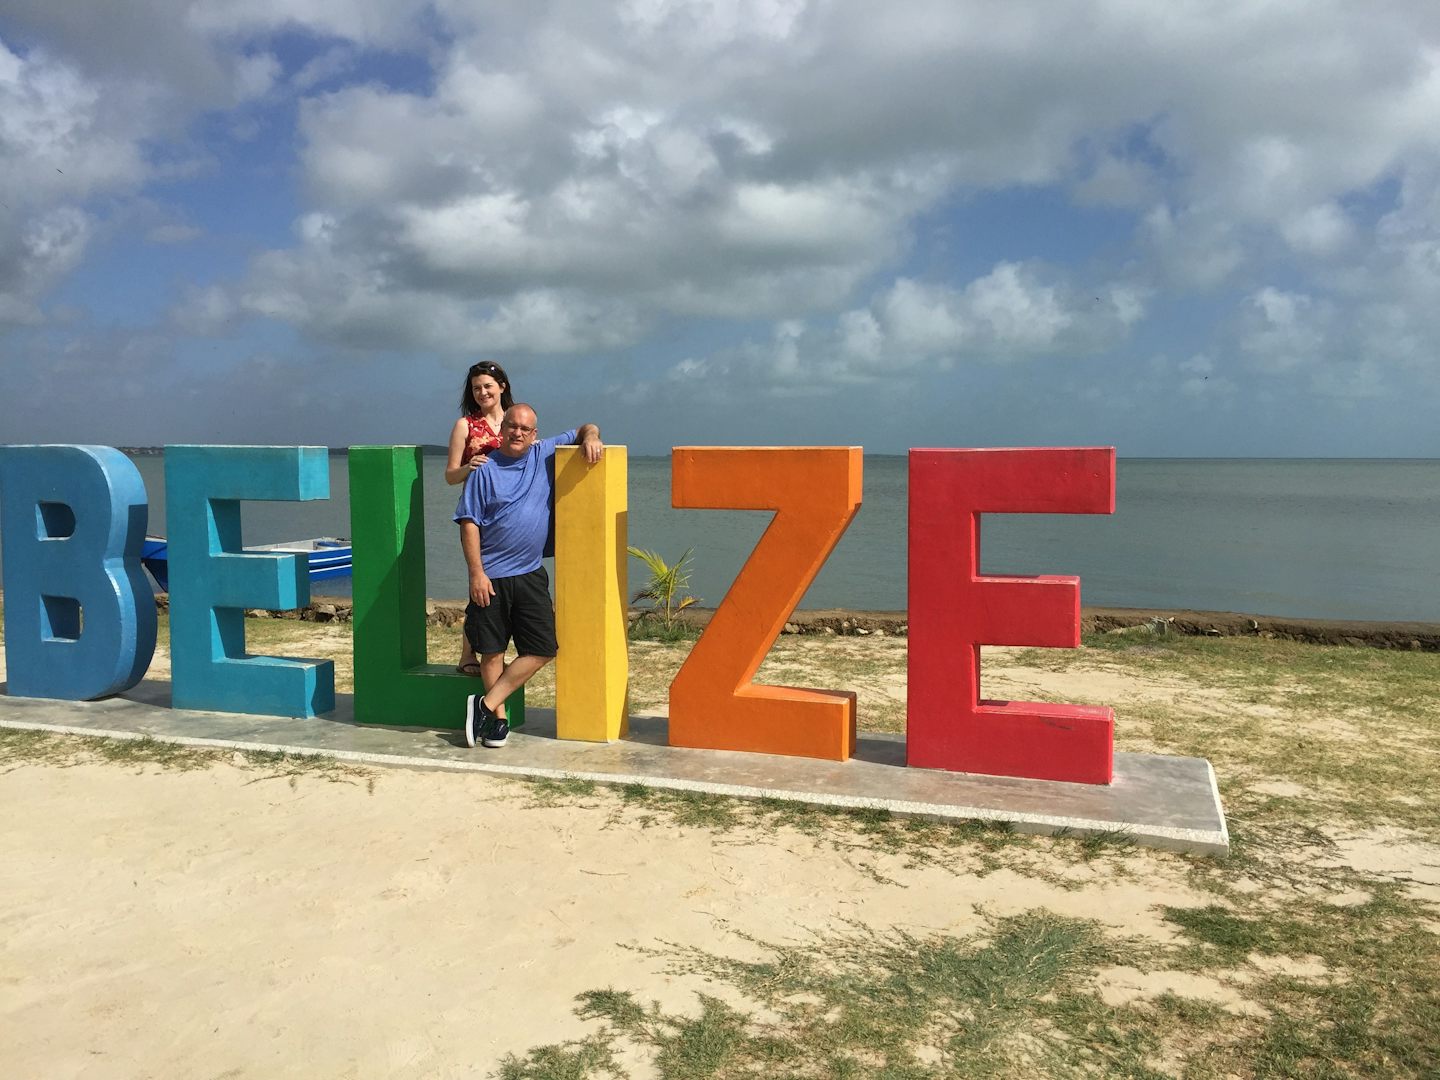 Belize photo op in a park while driving around.  Free!!